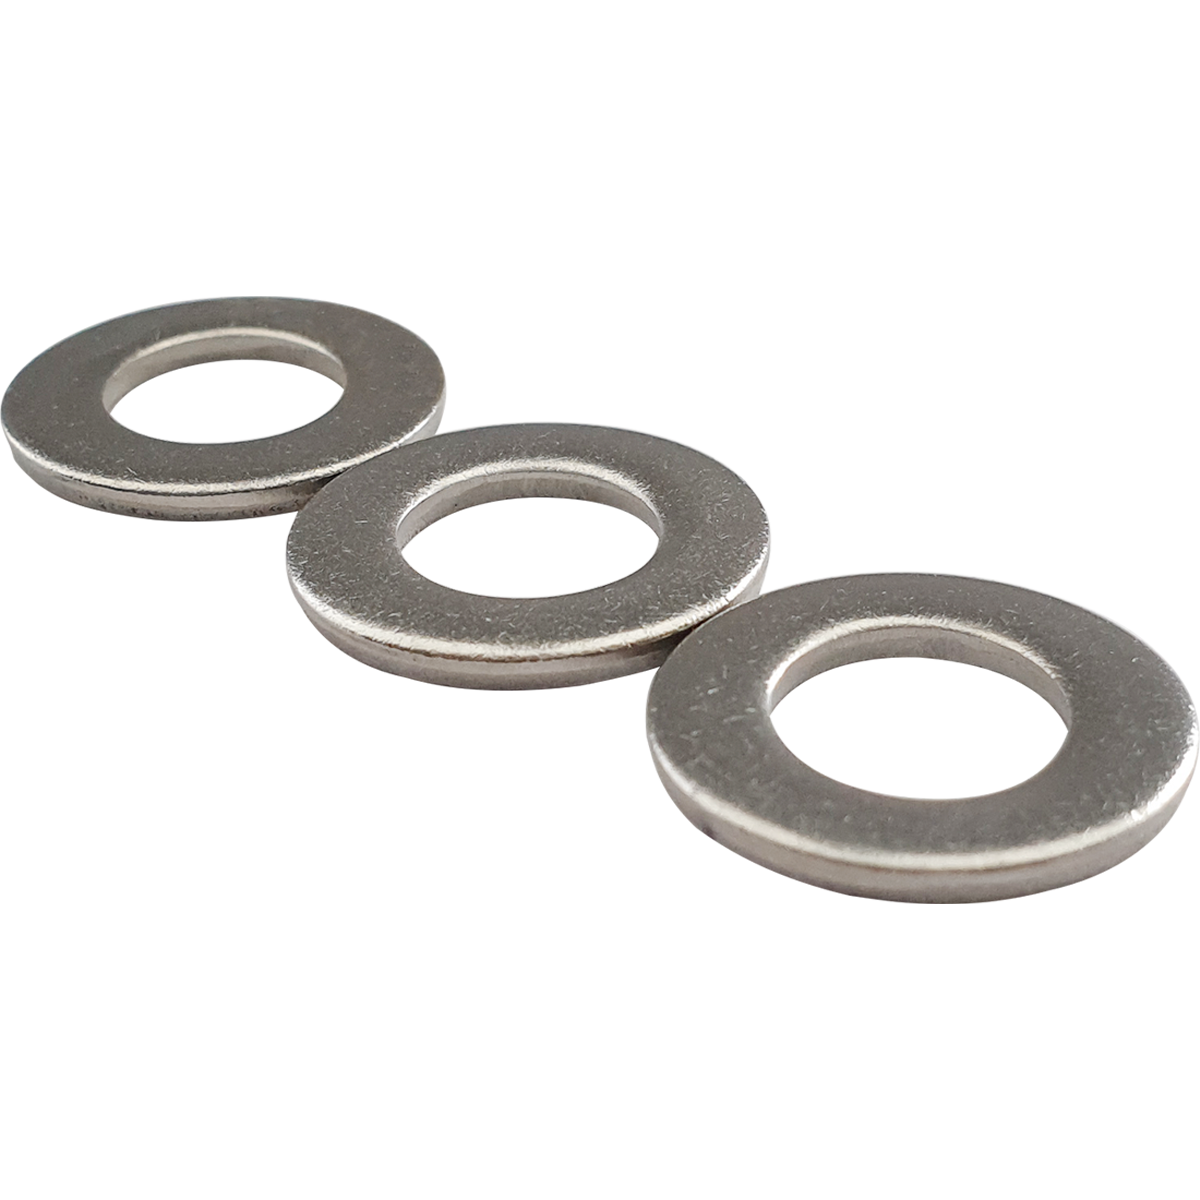 'Form A' washers at great prices with bulk discounts available.